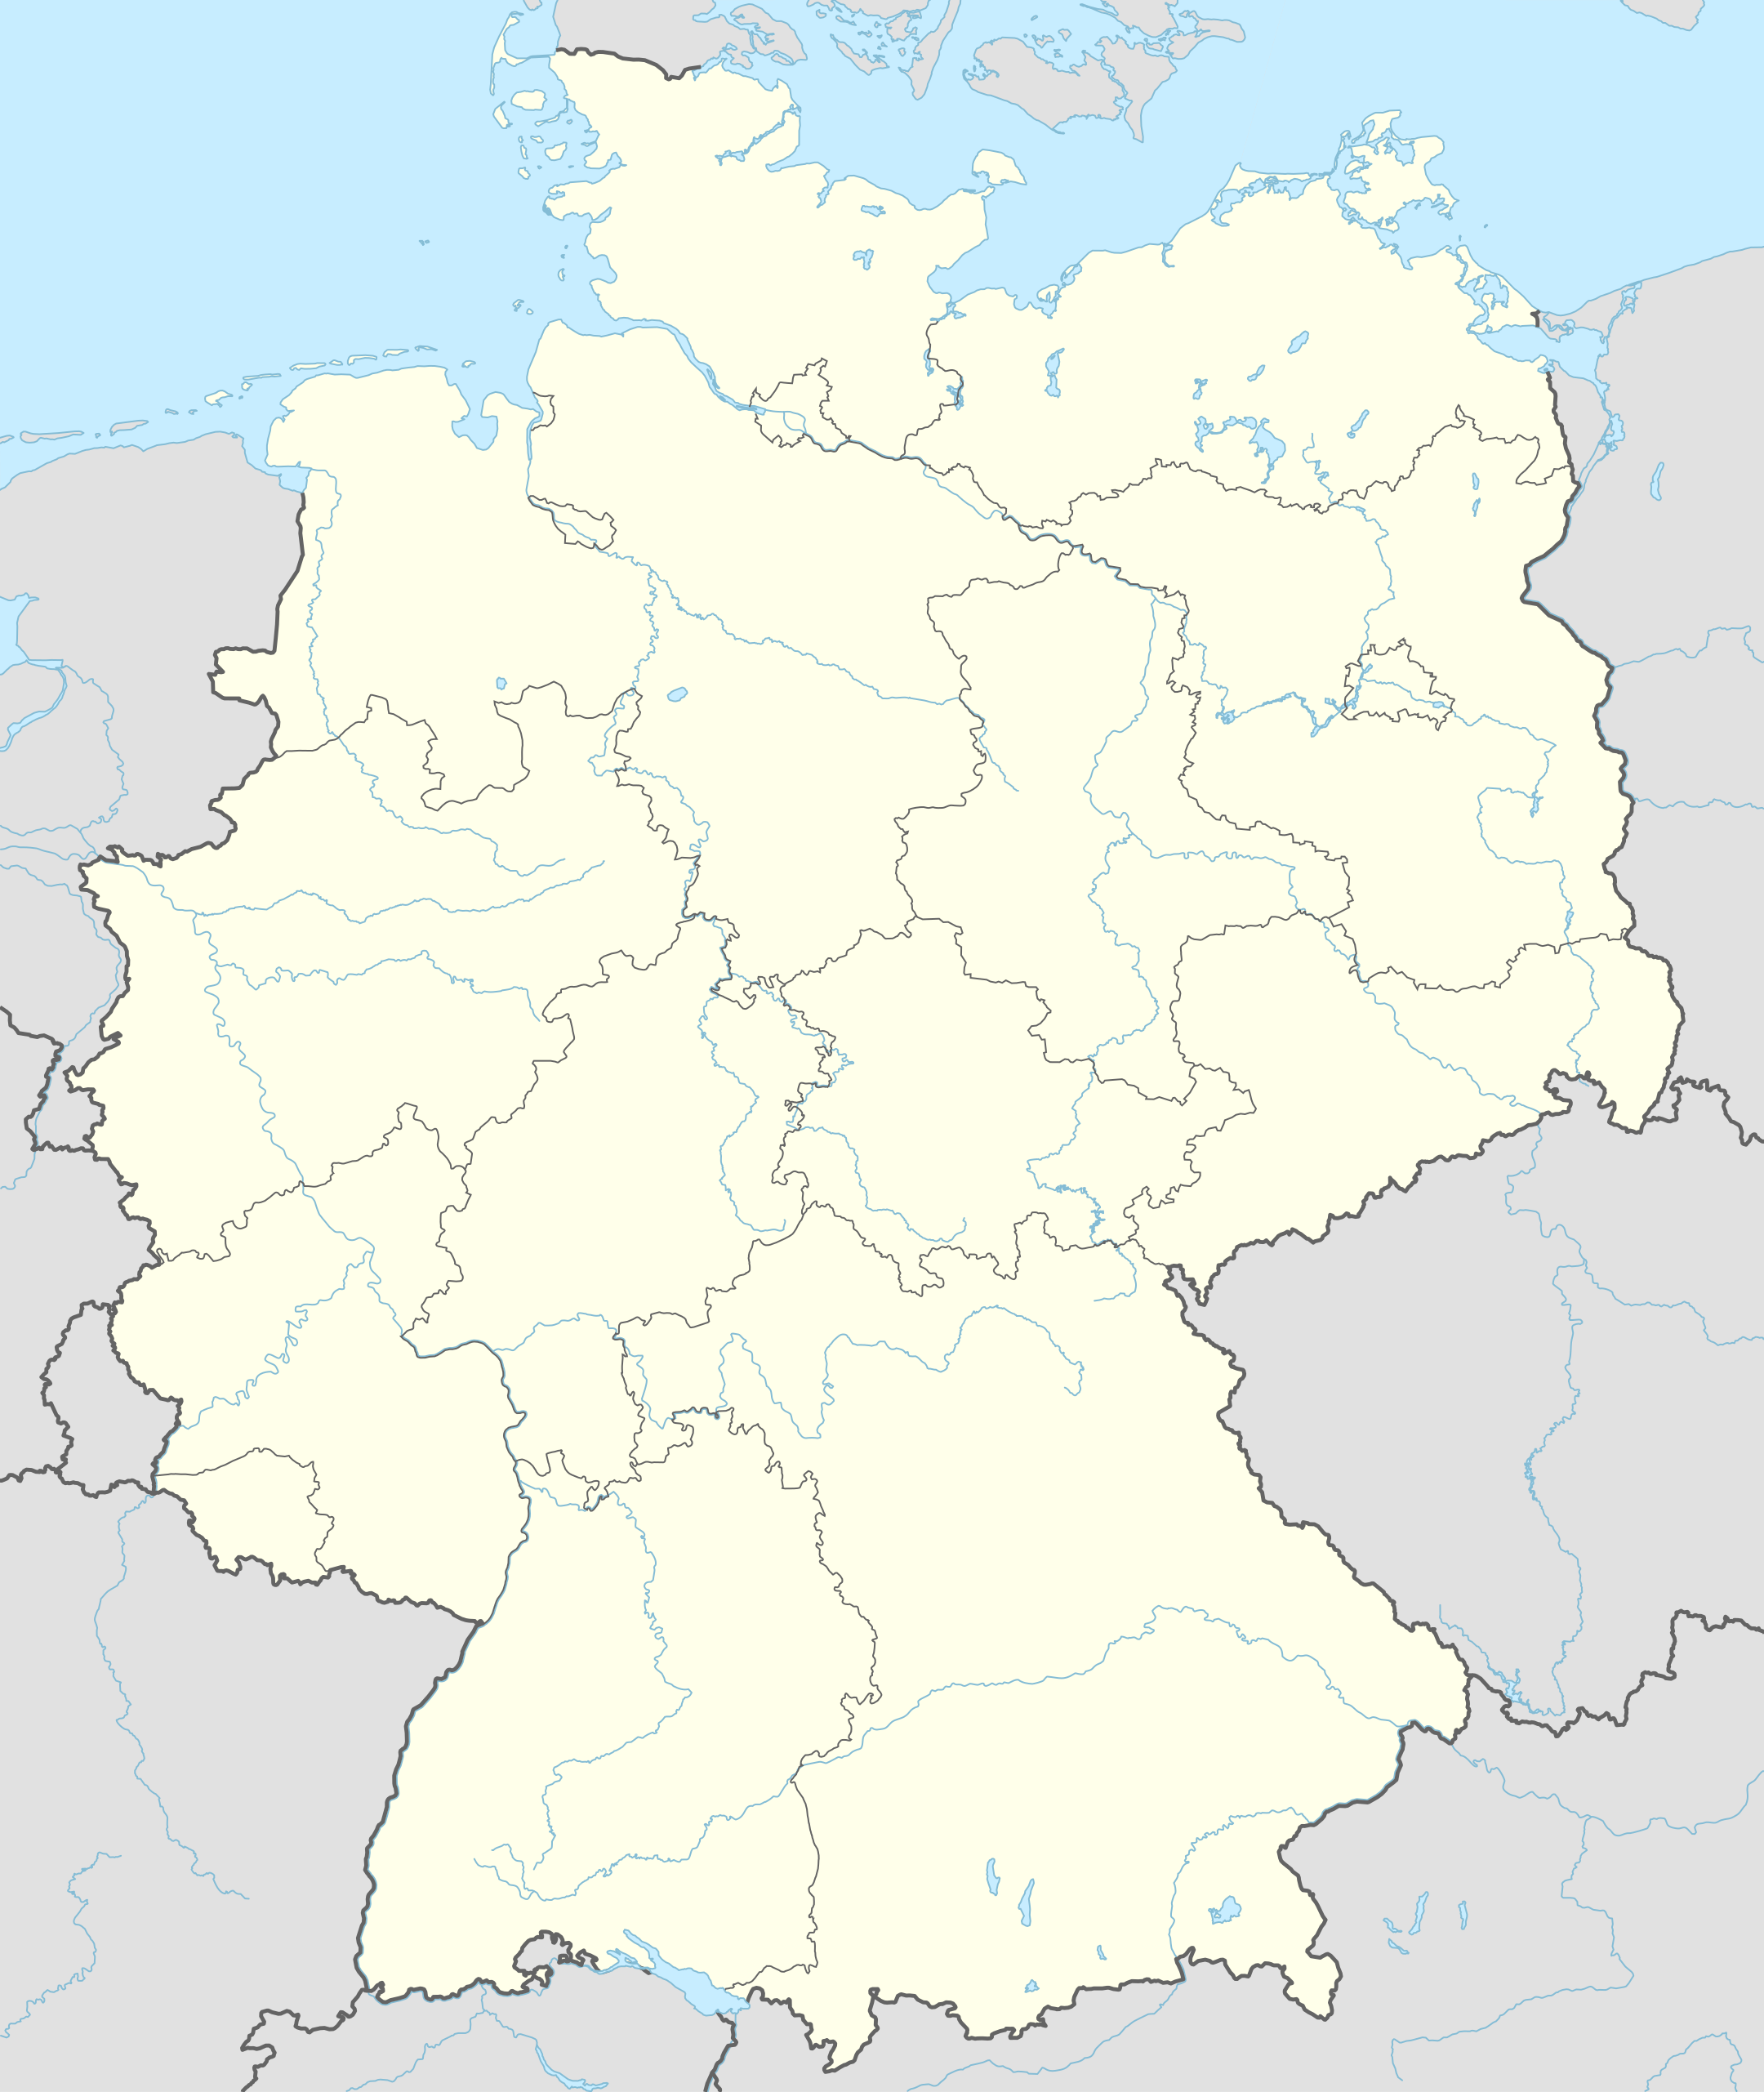 List of World Heritage Sites in Germany is located in Germany